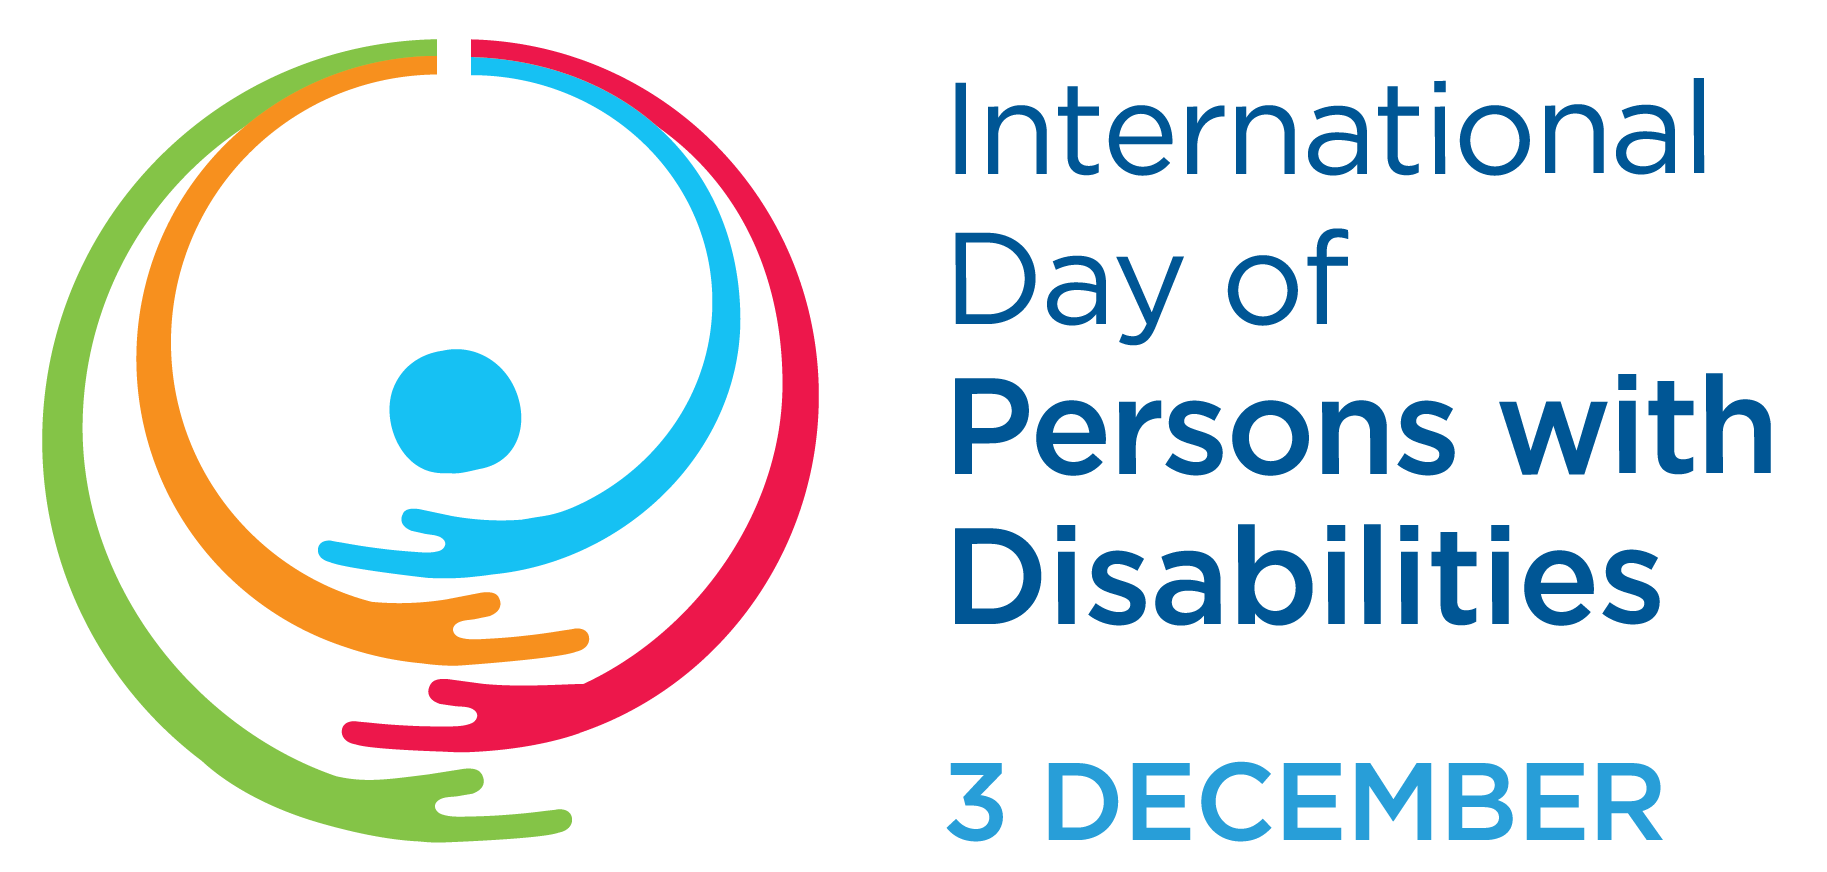 International Day of Persons with Disabilities - December 3 2022